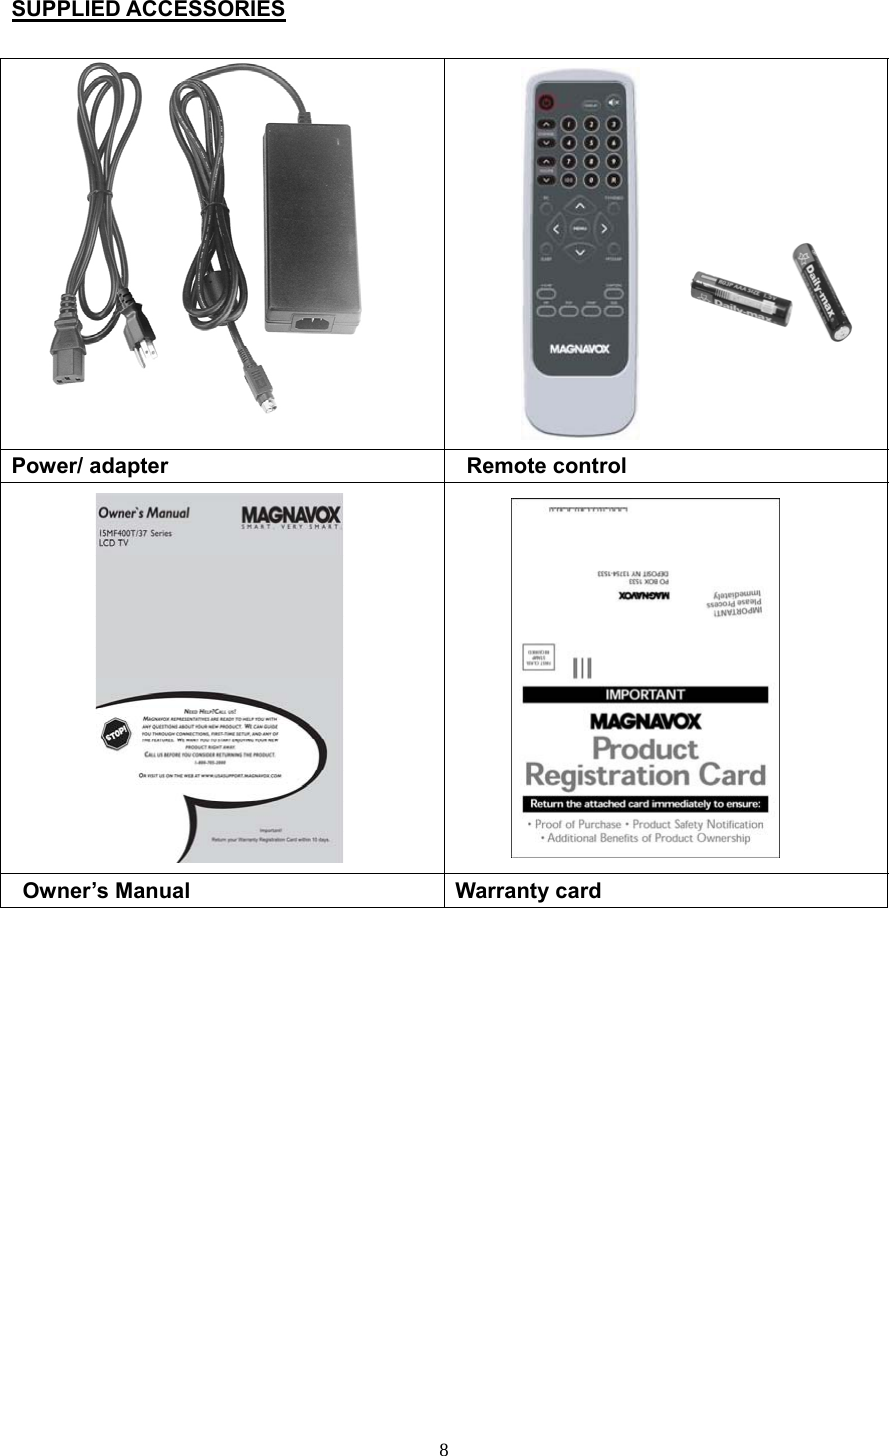  SUPPLIED ACCESSORIES          Power/ adapter    Remote control     Owner’s Manual  Warranty card                 8